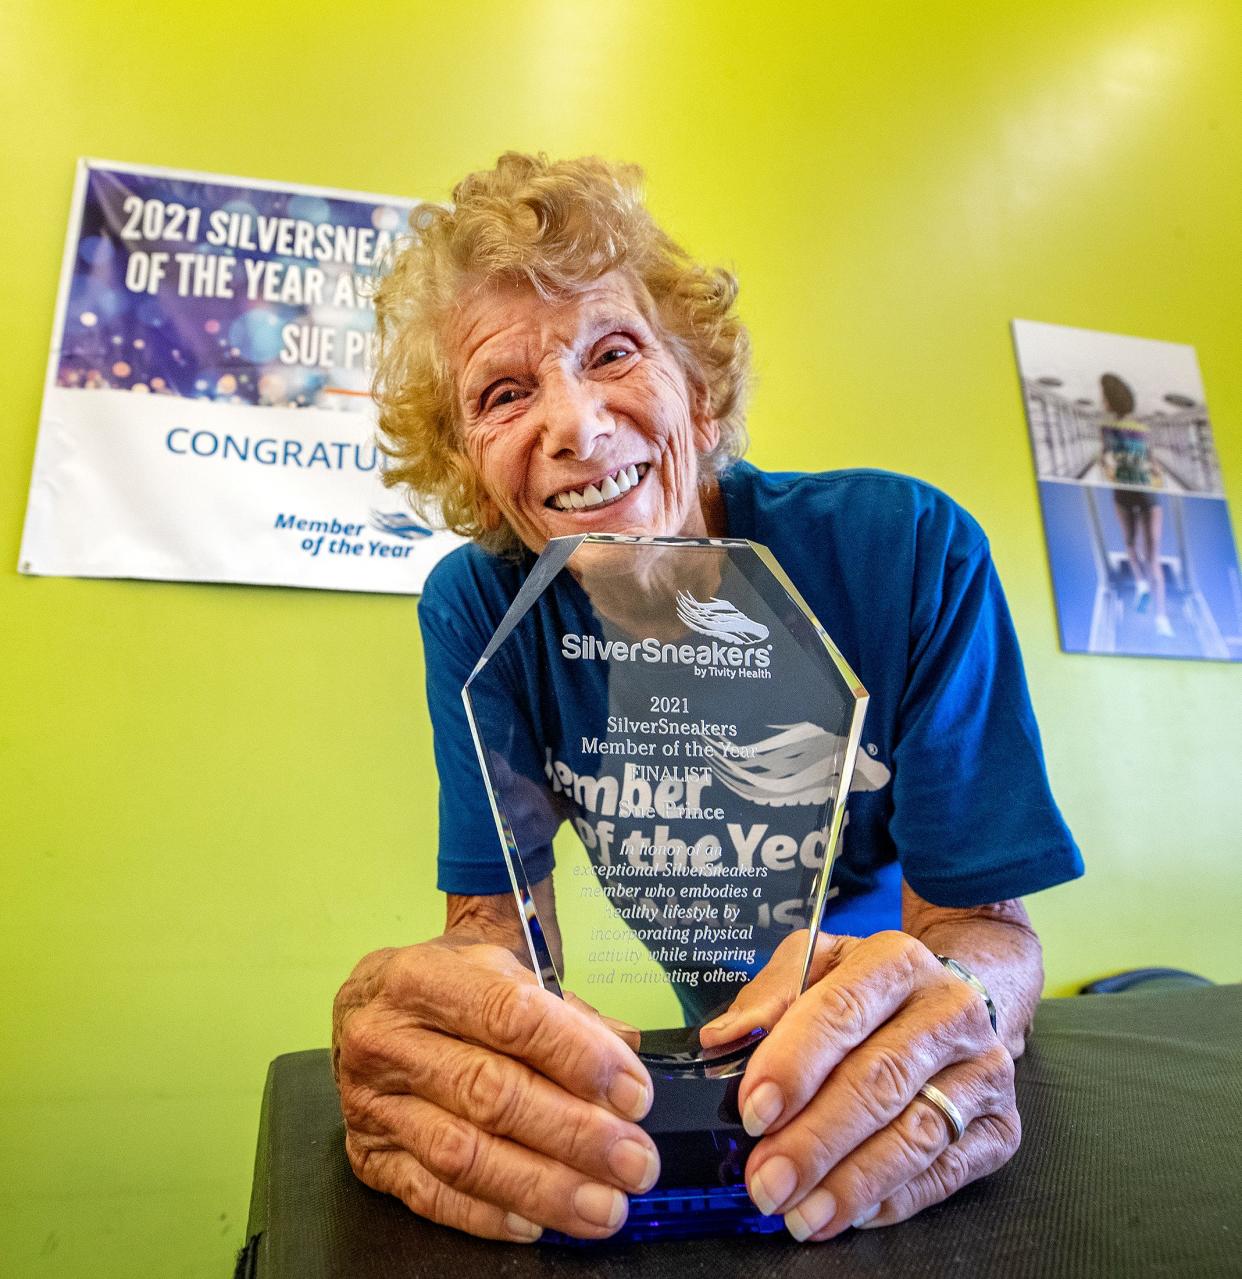 Sue Prince, 82, has been selected as a SilverSneakers 2021 Member Of The Year finalist.